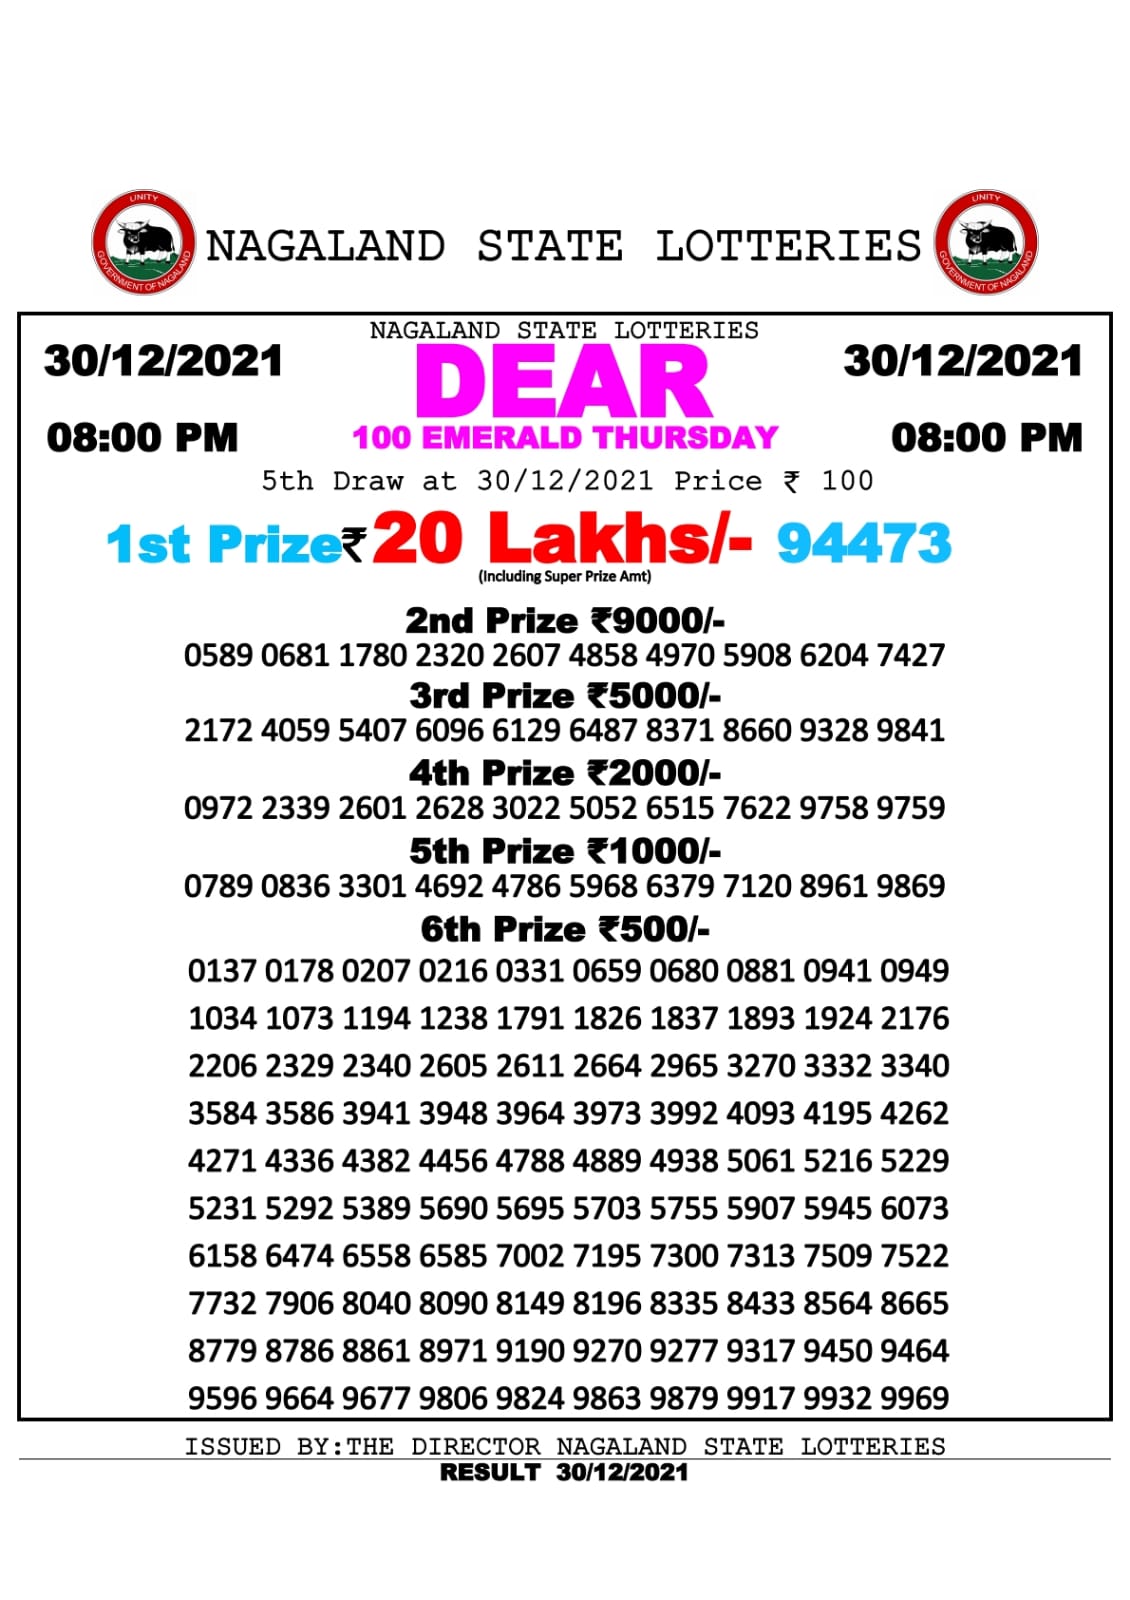 NAGALLAND STATE DEAR 100 WEEKLY LOTTERY 8 pm 30.12.2021